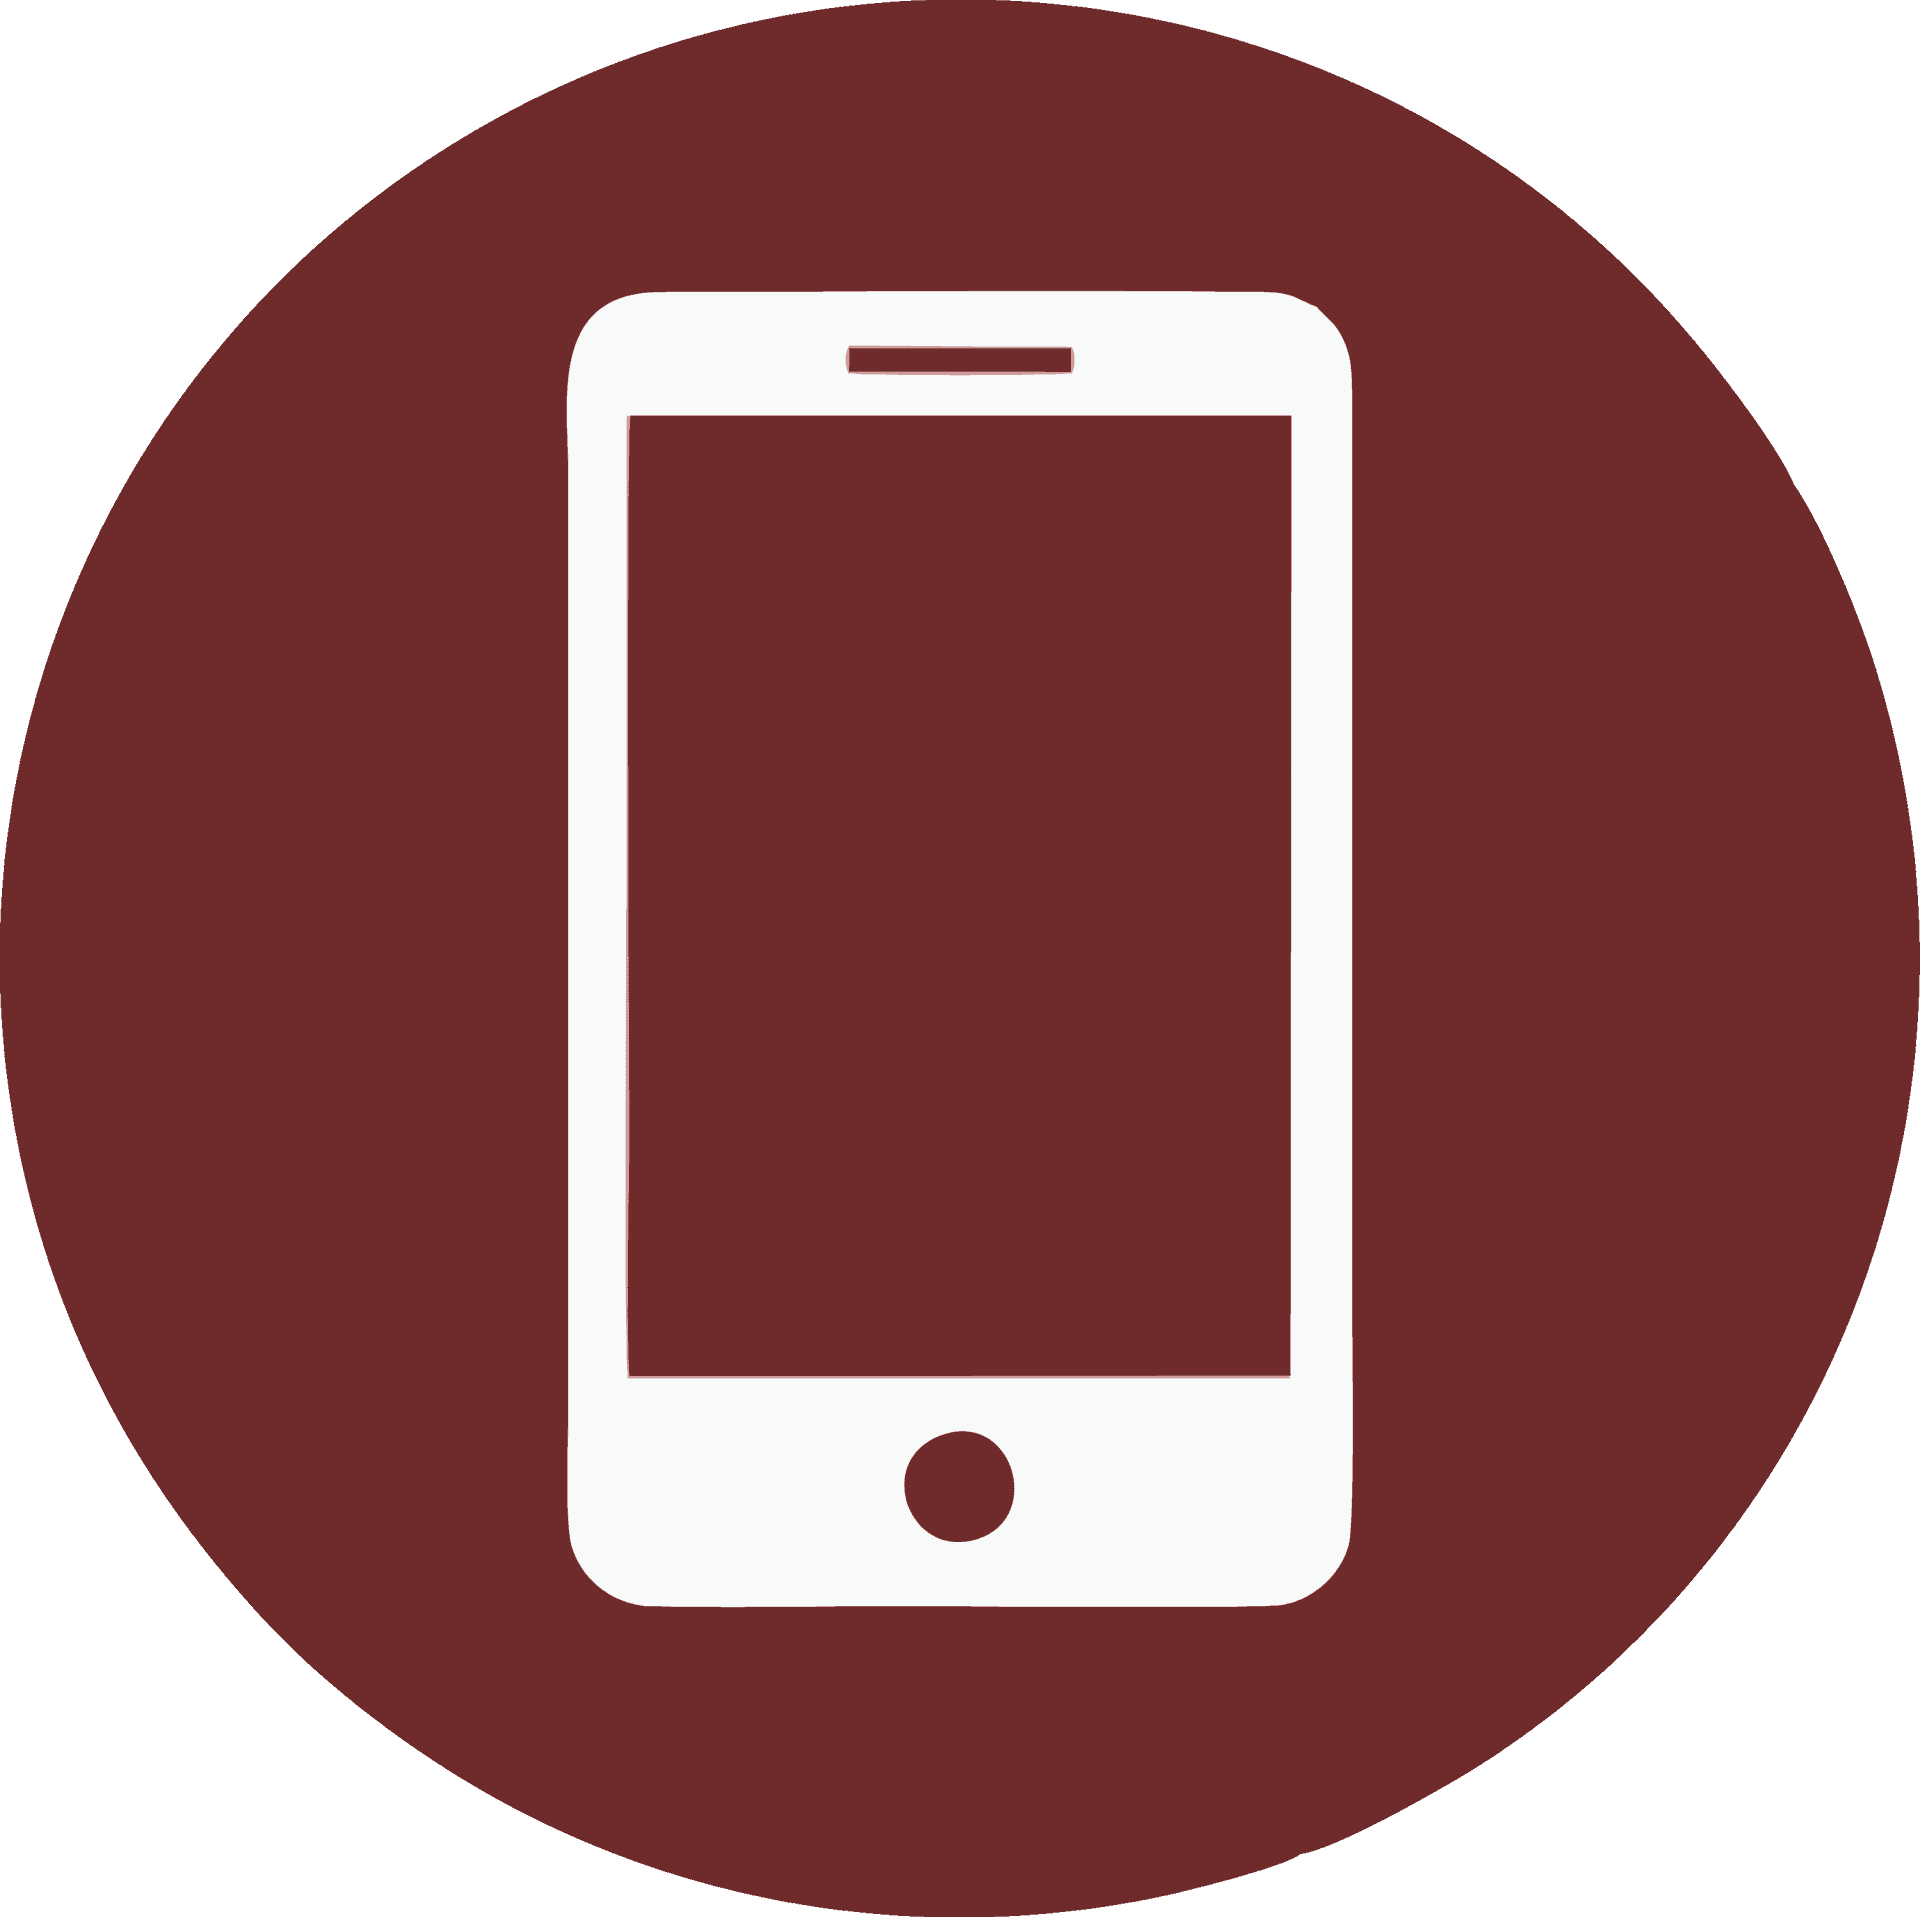 Mobile Phone Icon Simple Design PNG image